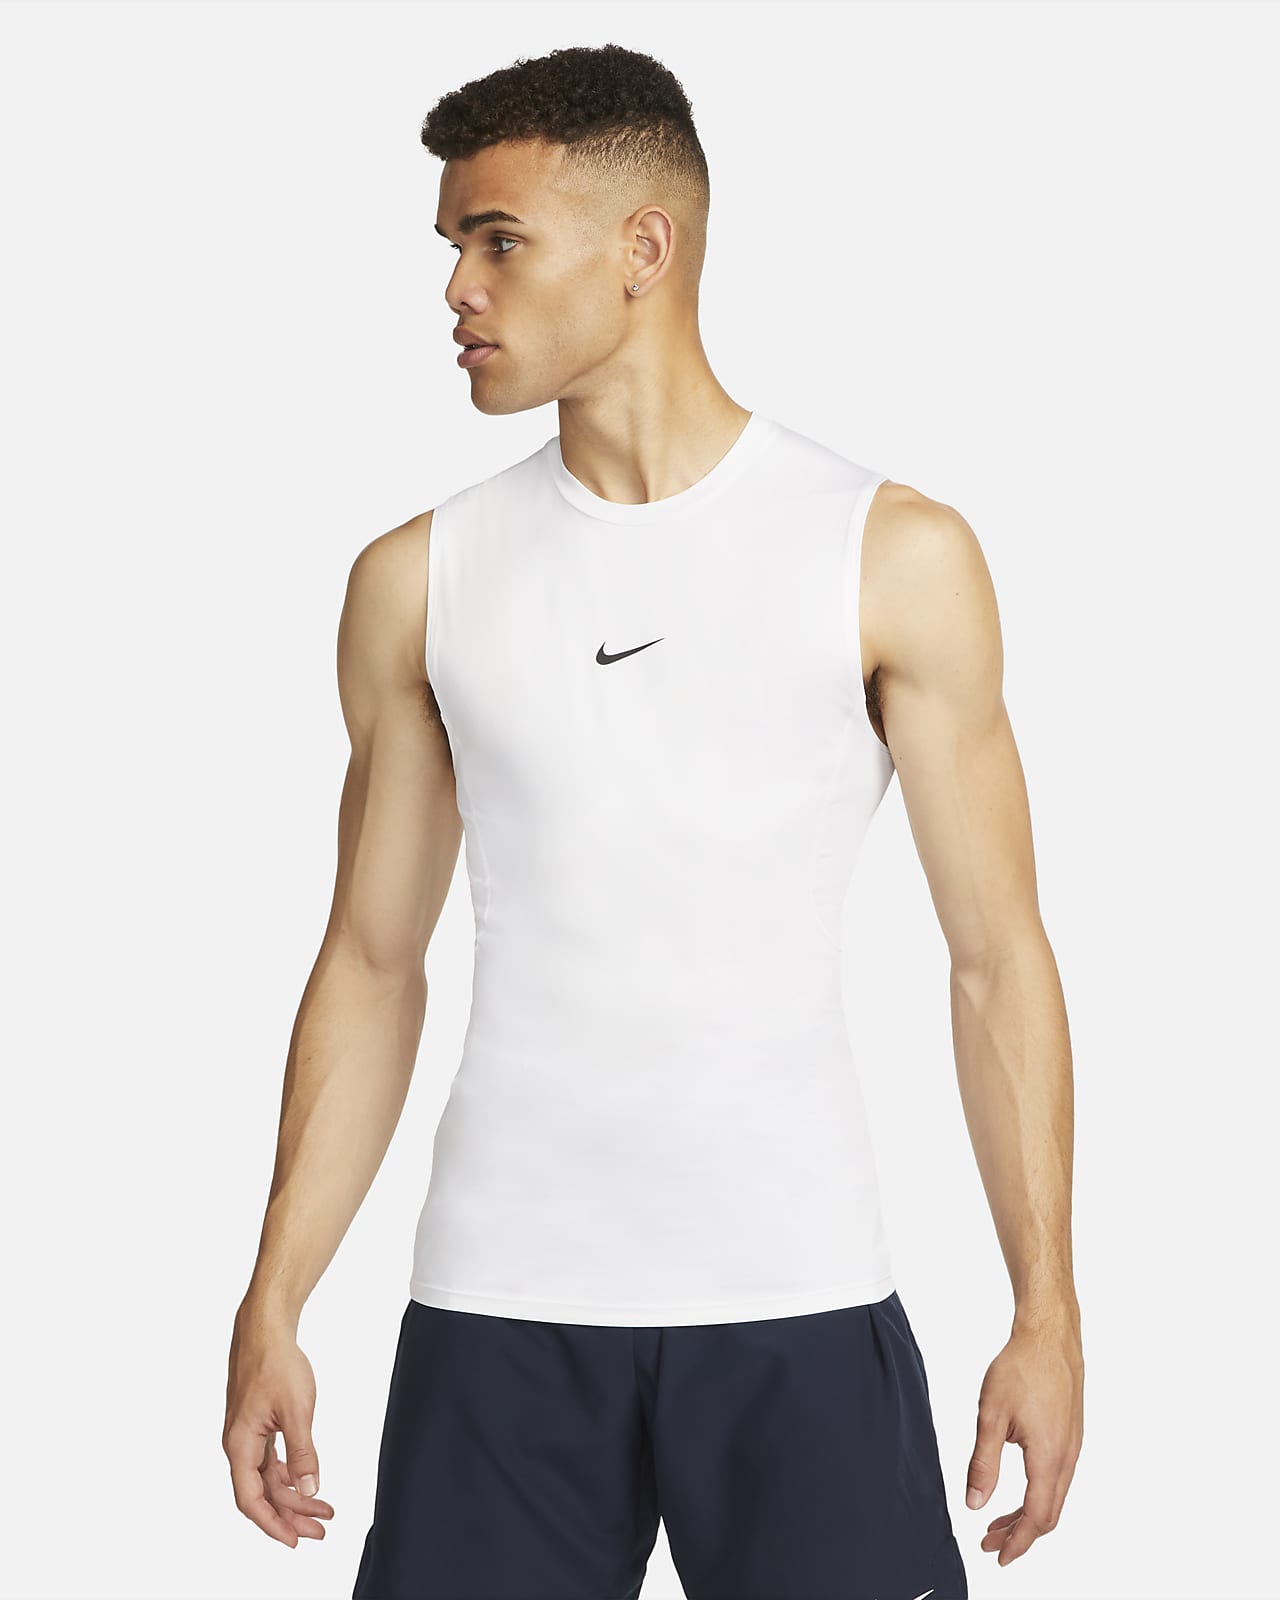 https://static.nike.com/a/images/t_PDP_1280_v1/f_auto,q_auto:eco/5ea9b1eb-887a-4d47-97f3-b0e38d4cda0d/pro-dri-fit-tight-sleeveless-fitness-top-jkHZxS.png